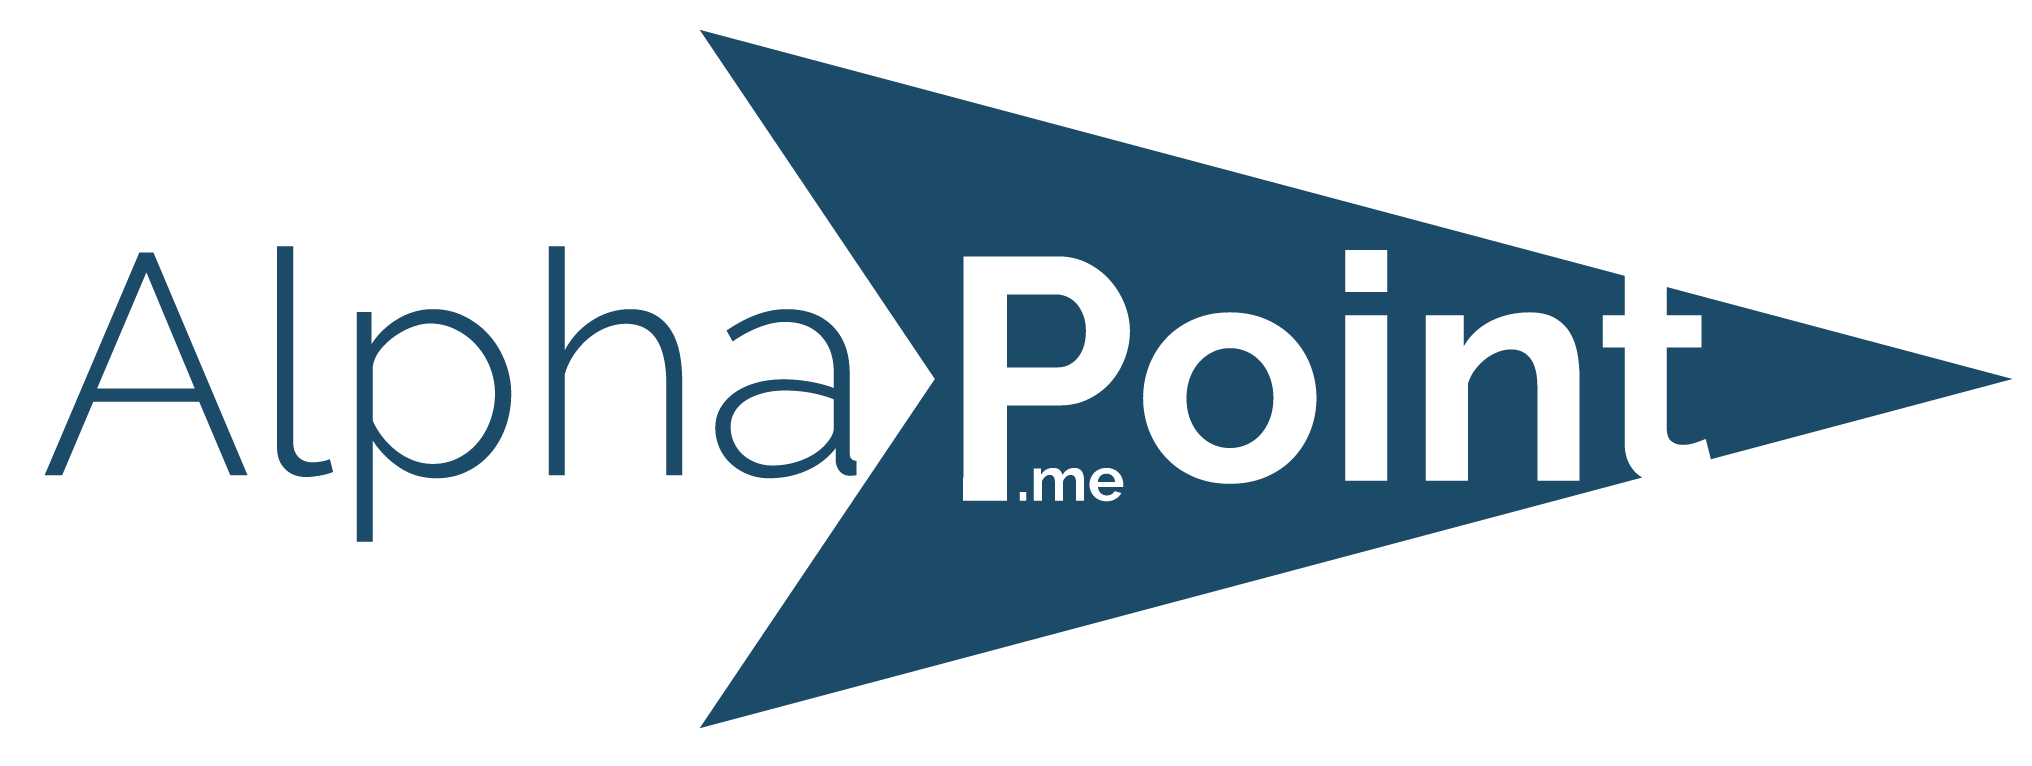 Image of AlphaPoint.me Resilience Program